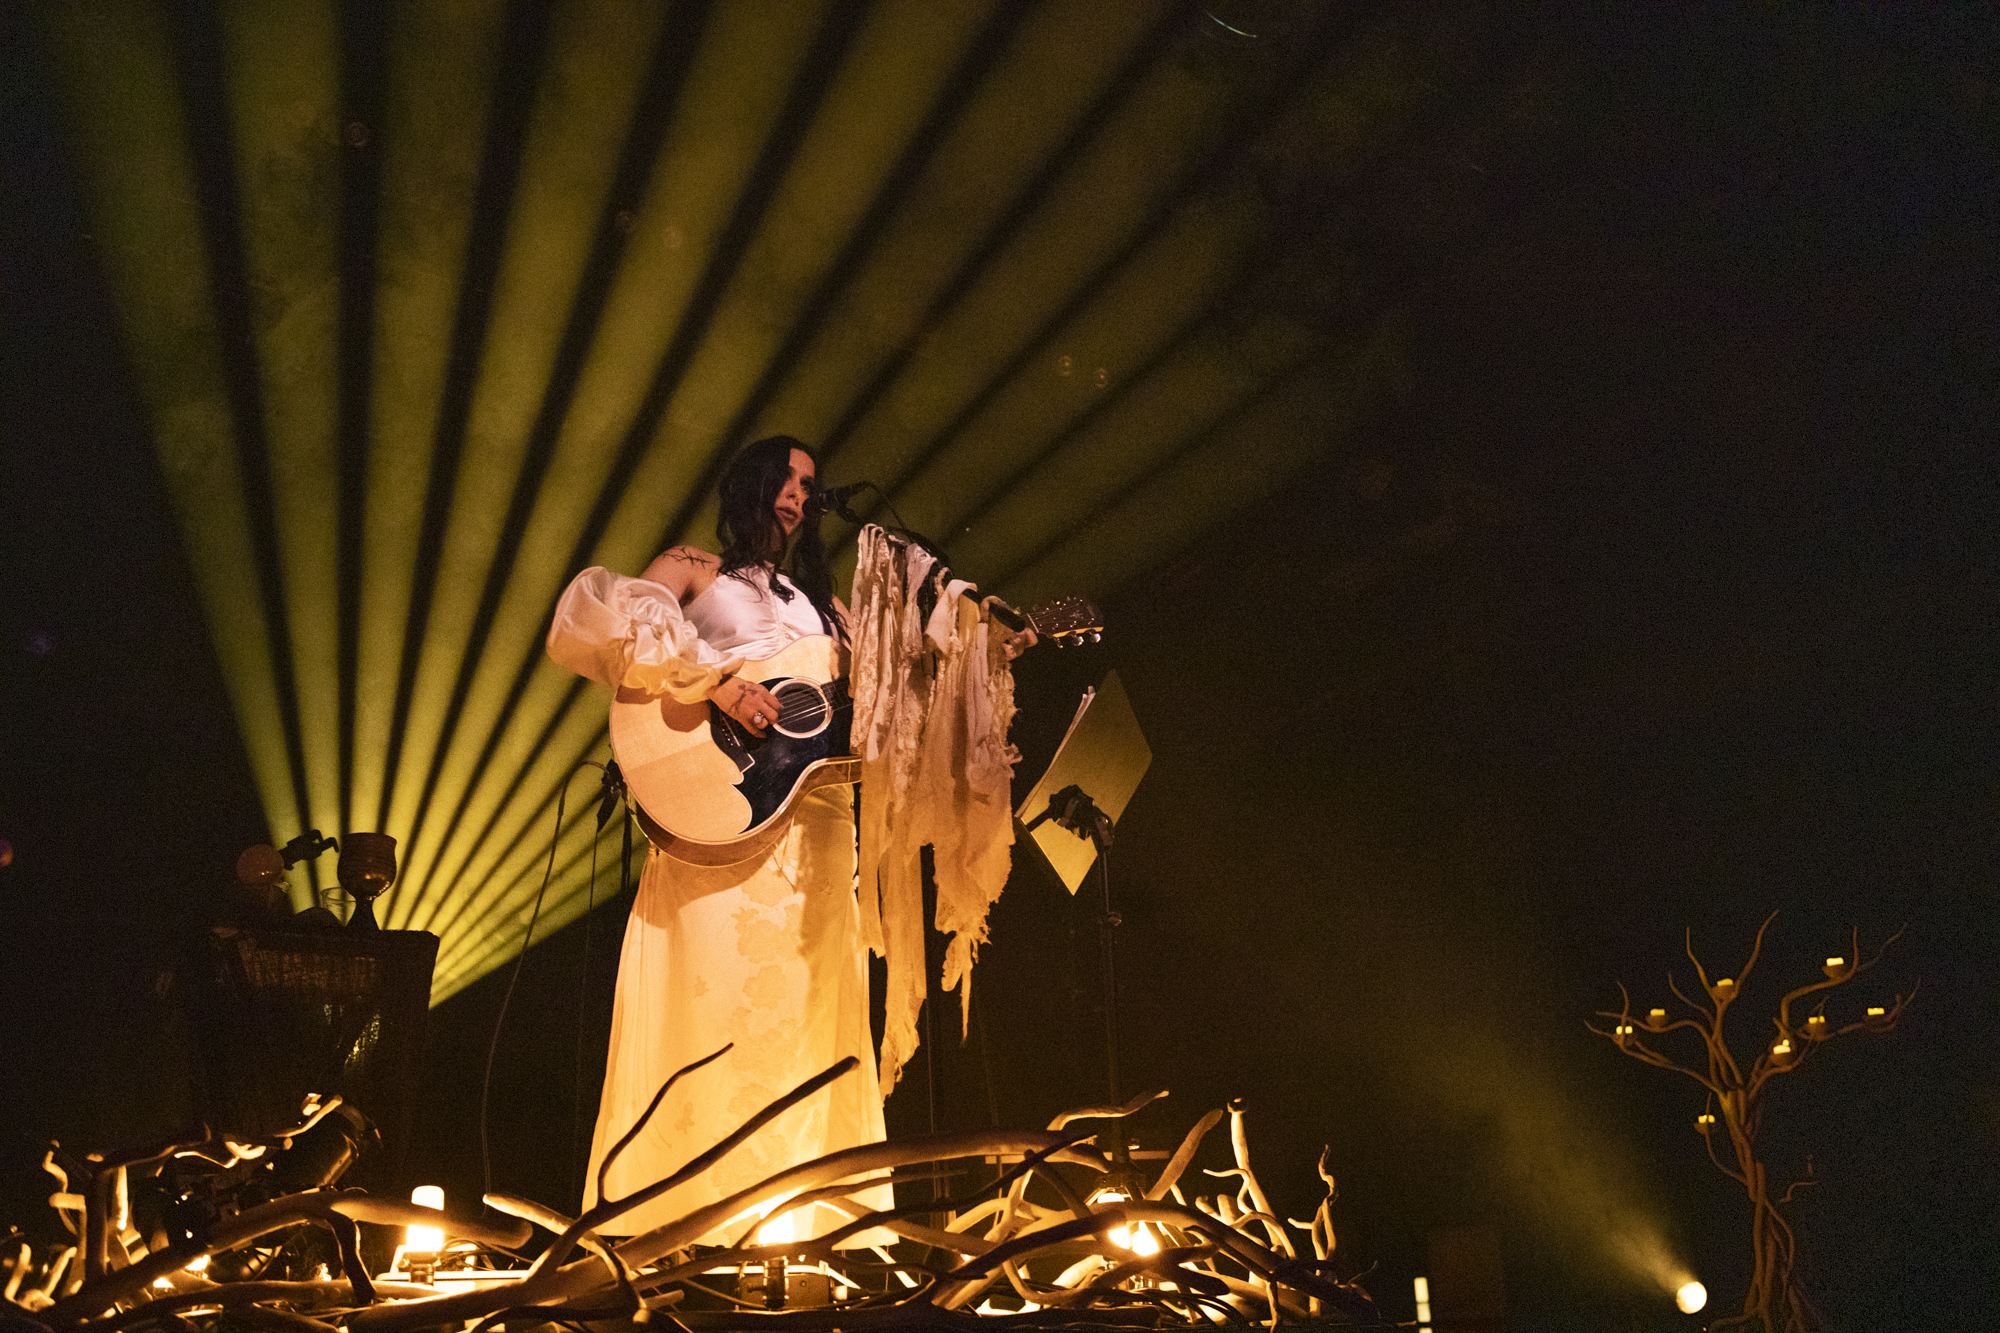 Chelsea Wolfe plays at Brooklyn Steel in Williamsburg, Brooklyn, New York on Nov. 1, 2019. (© Michael Katzif - Do not use or republish without prior consent.)